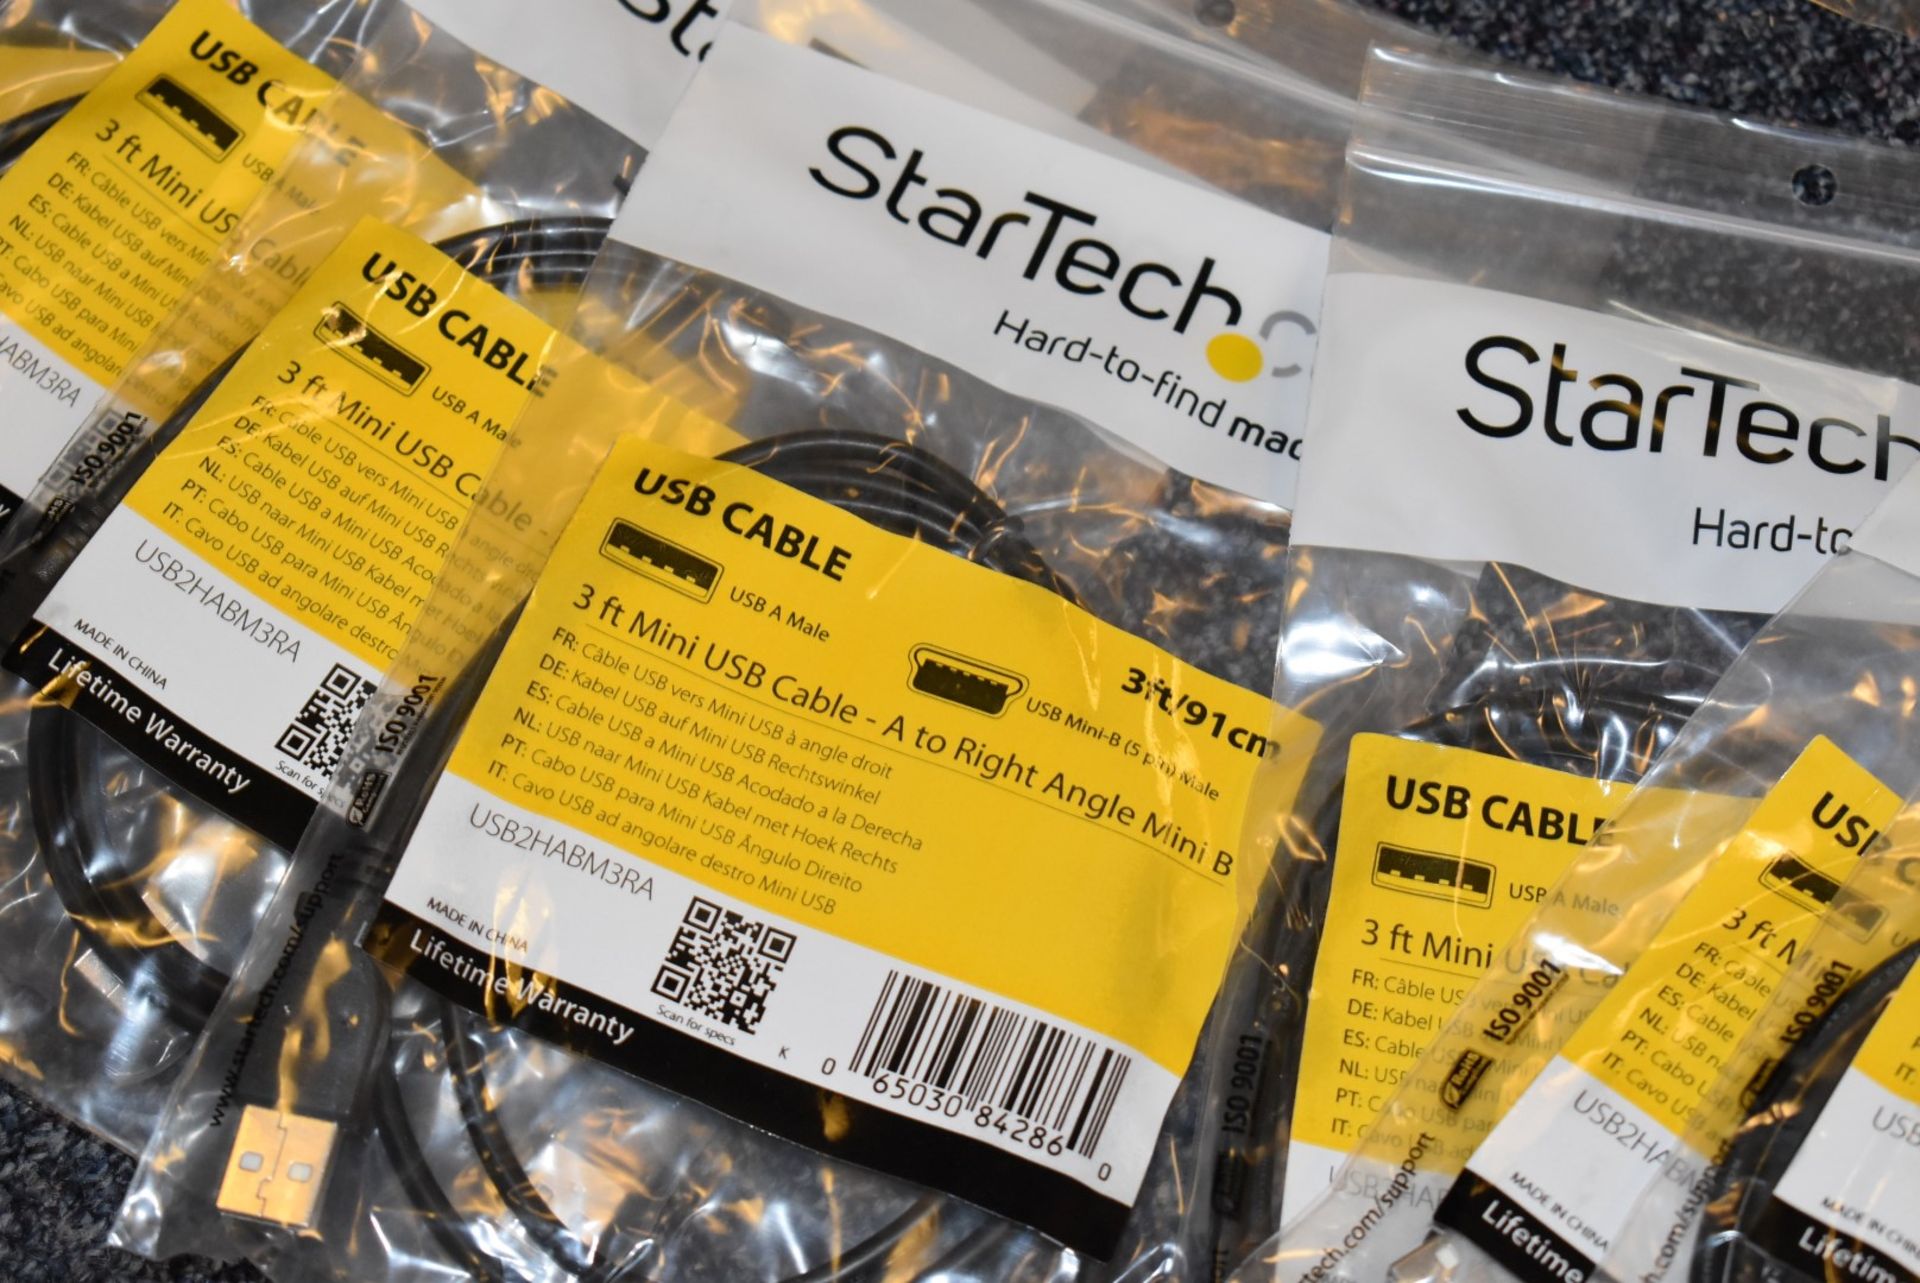 177 x Assorted StarTech Cables - Huge Lot in Original Packing - Various Cables Included - Image 10 of 50